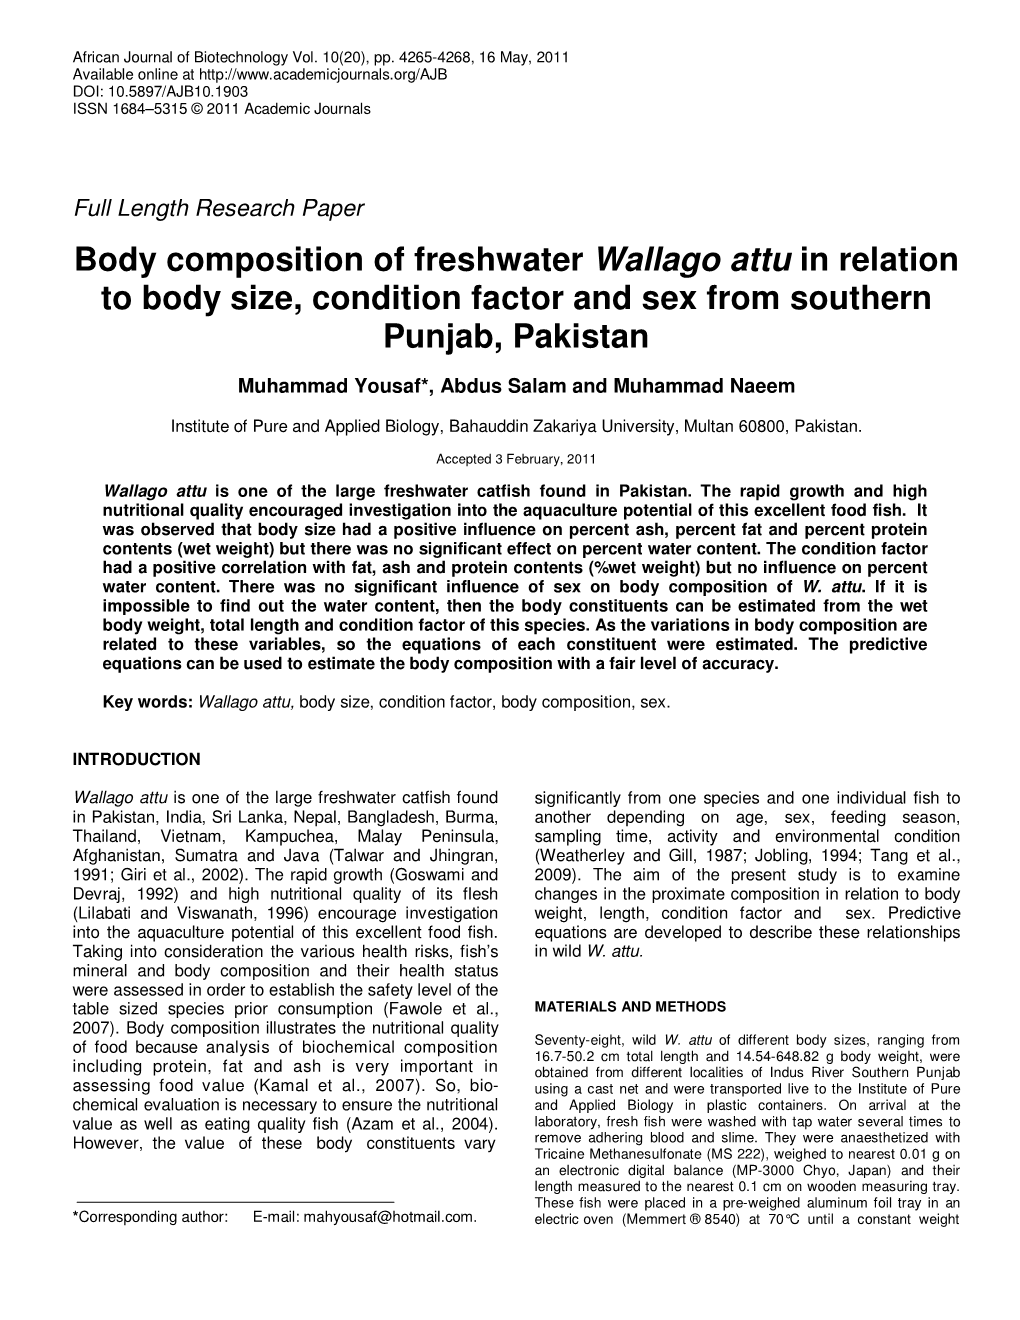 Body Composition of Freshwater Wallago Attu in Relation to Body Size, Condition Factor and Sex from Southern Punjab, Pakistan